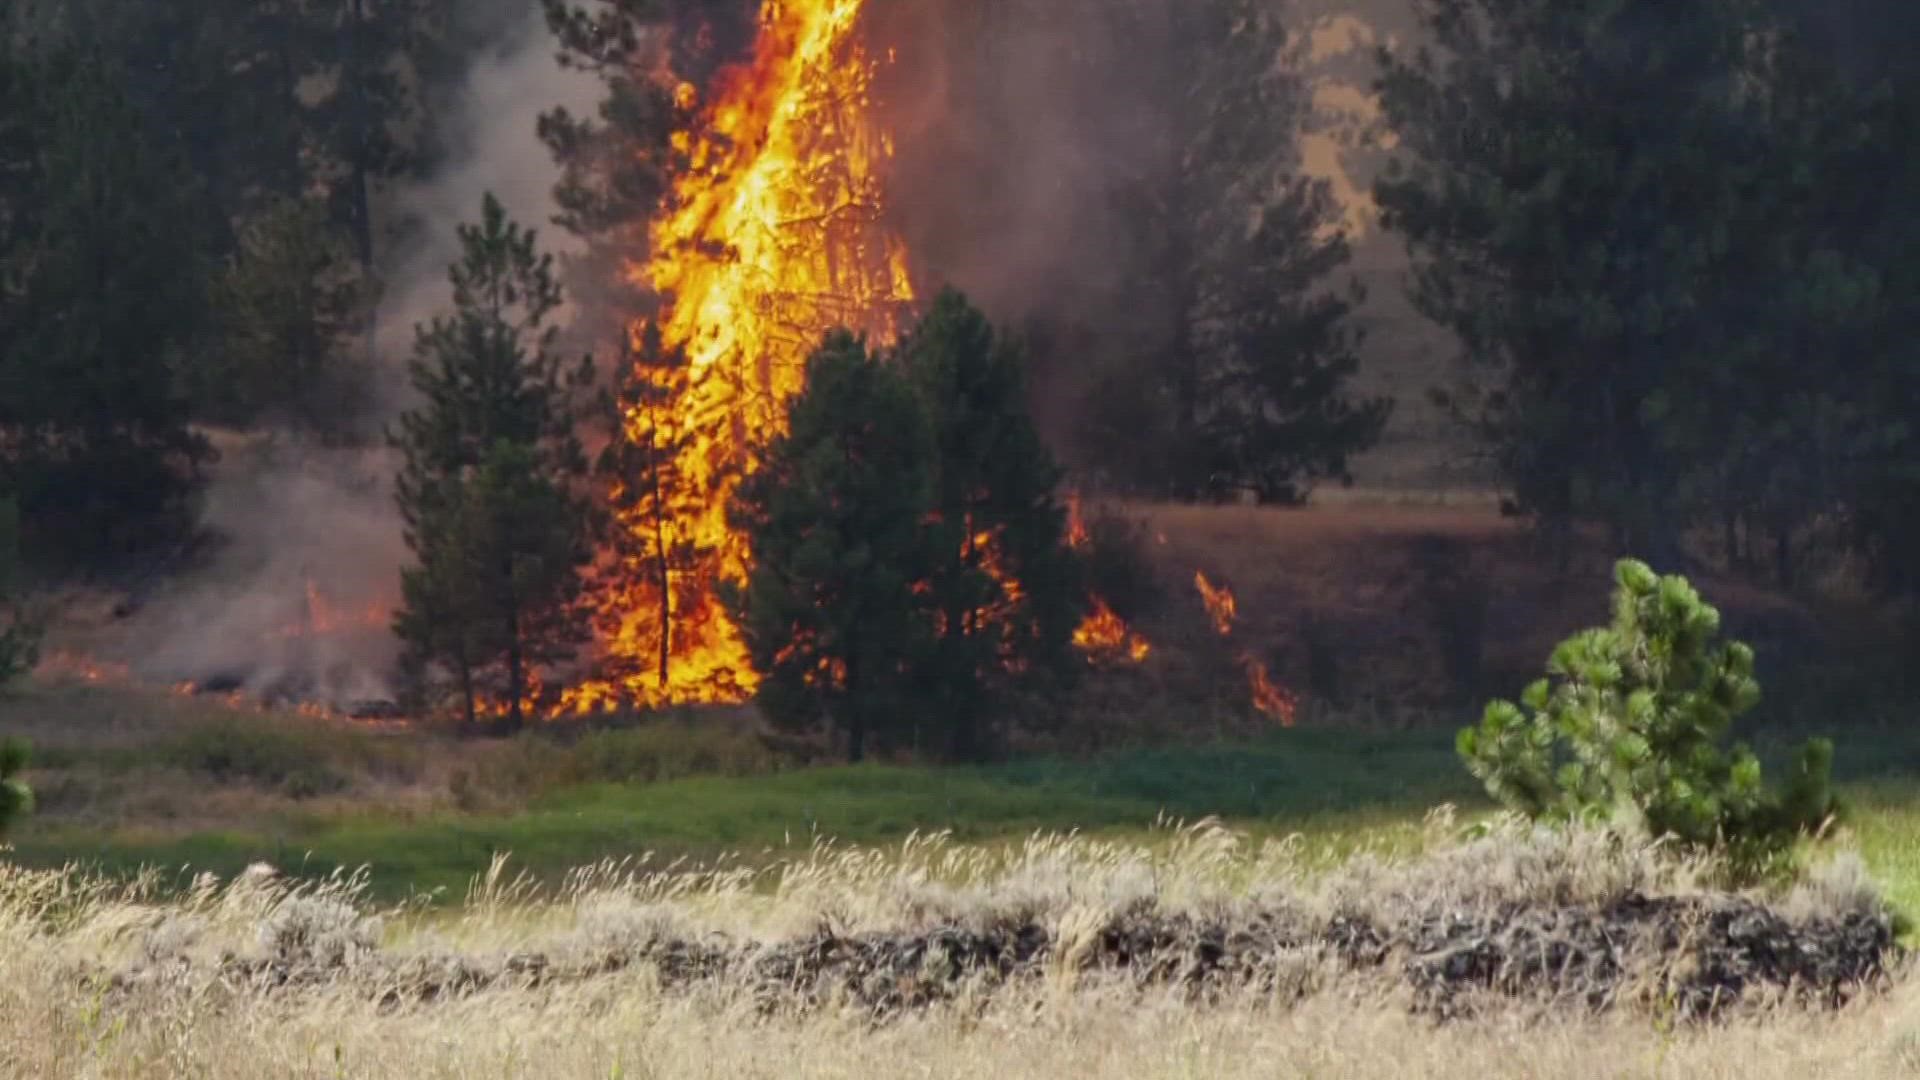 The fire has currently burned more than 1,600 acres and is 10% contained.